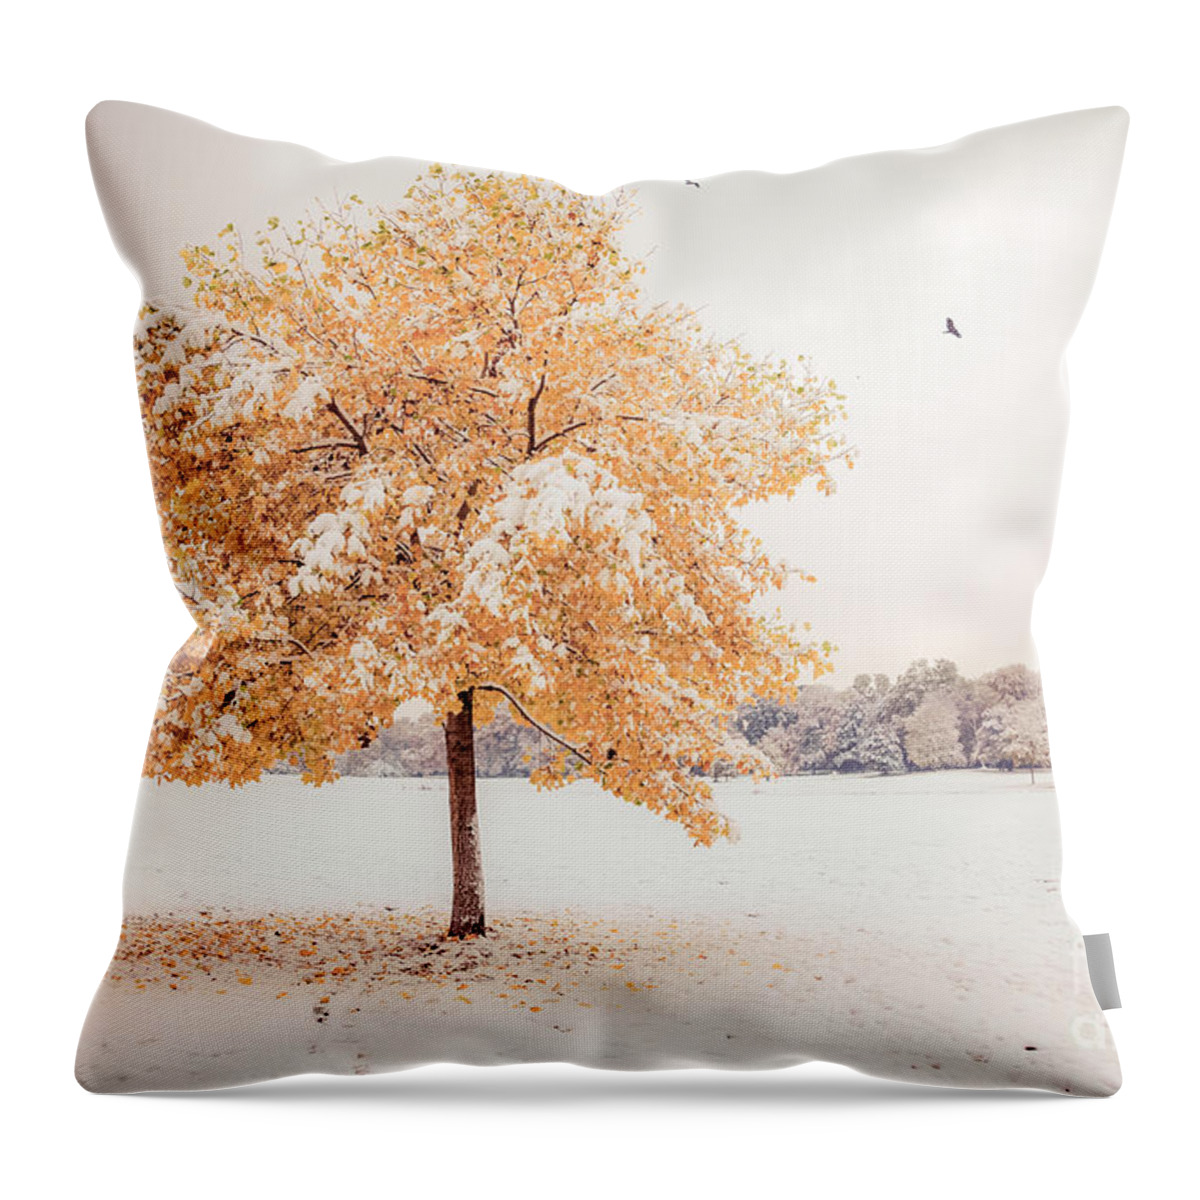 Autumn Throw Pillow featuring the photograph Still Dressed In Fall by Hannes Cmarits